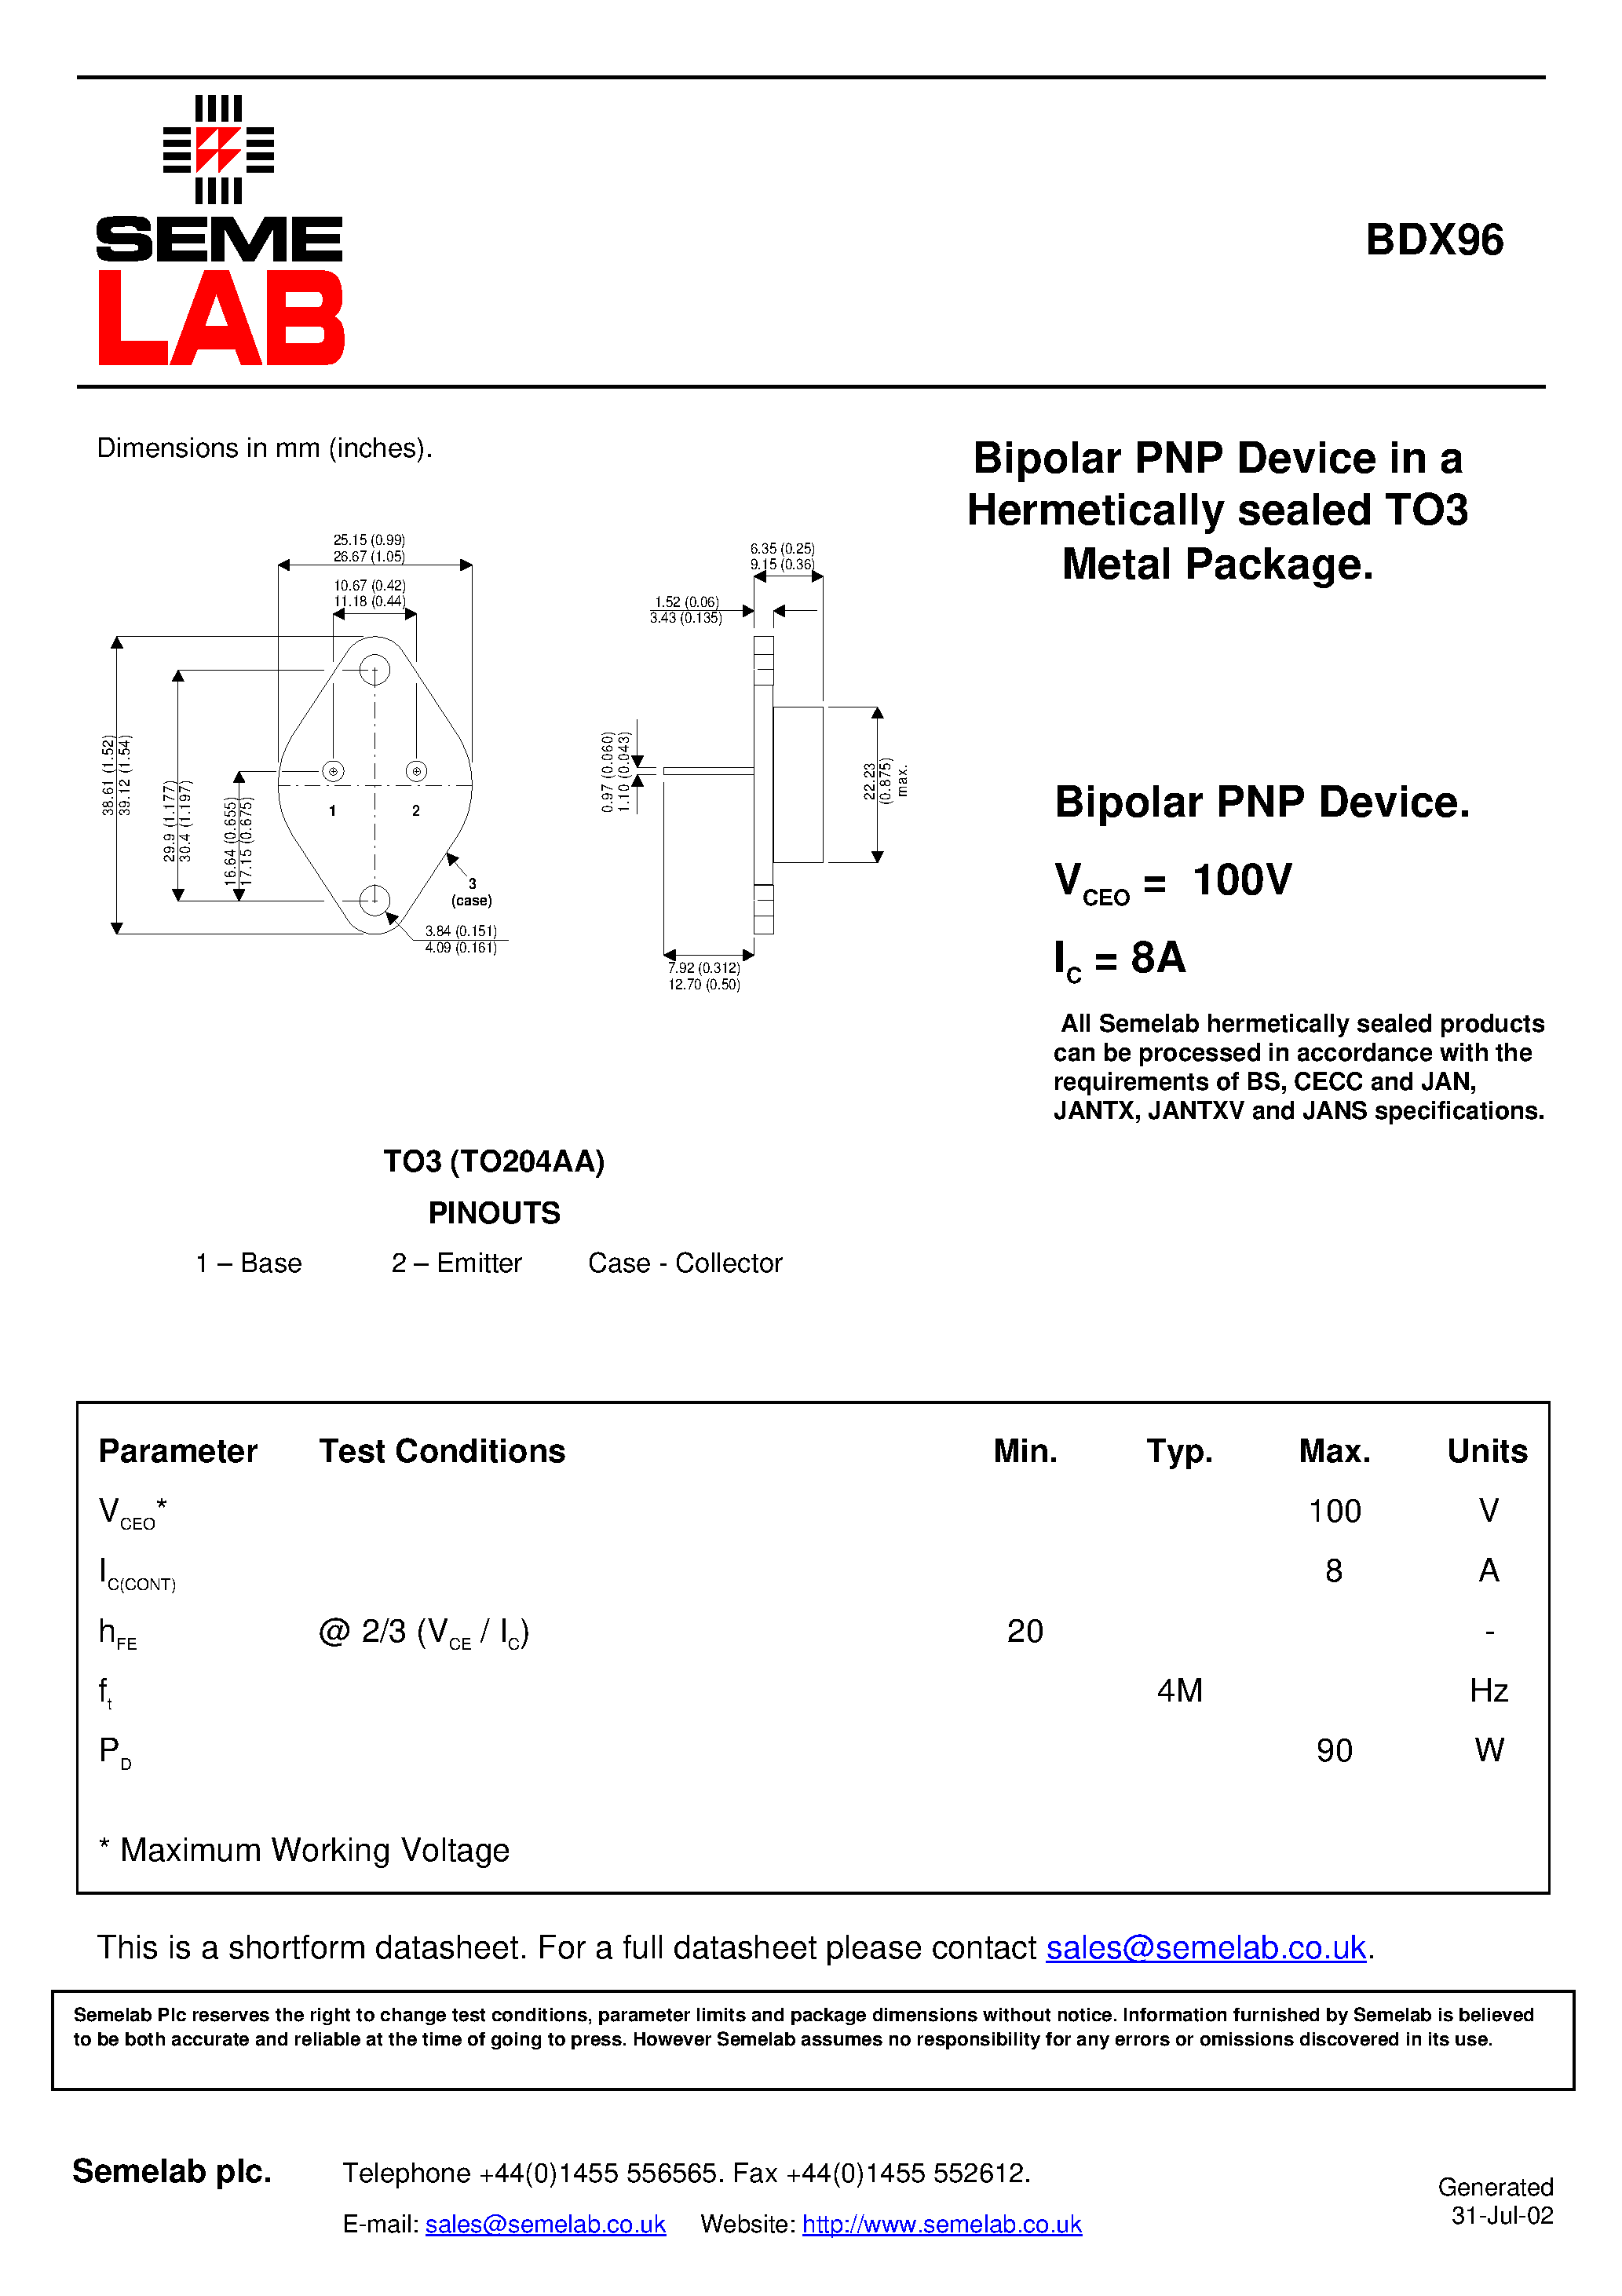 Datasheet BDX96 - Bipolar PNP Device in a Hermetically sealed TO3 Metal Package page 1